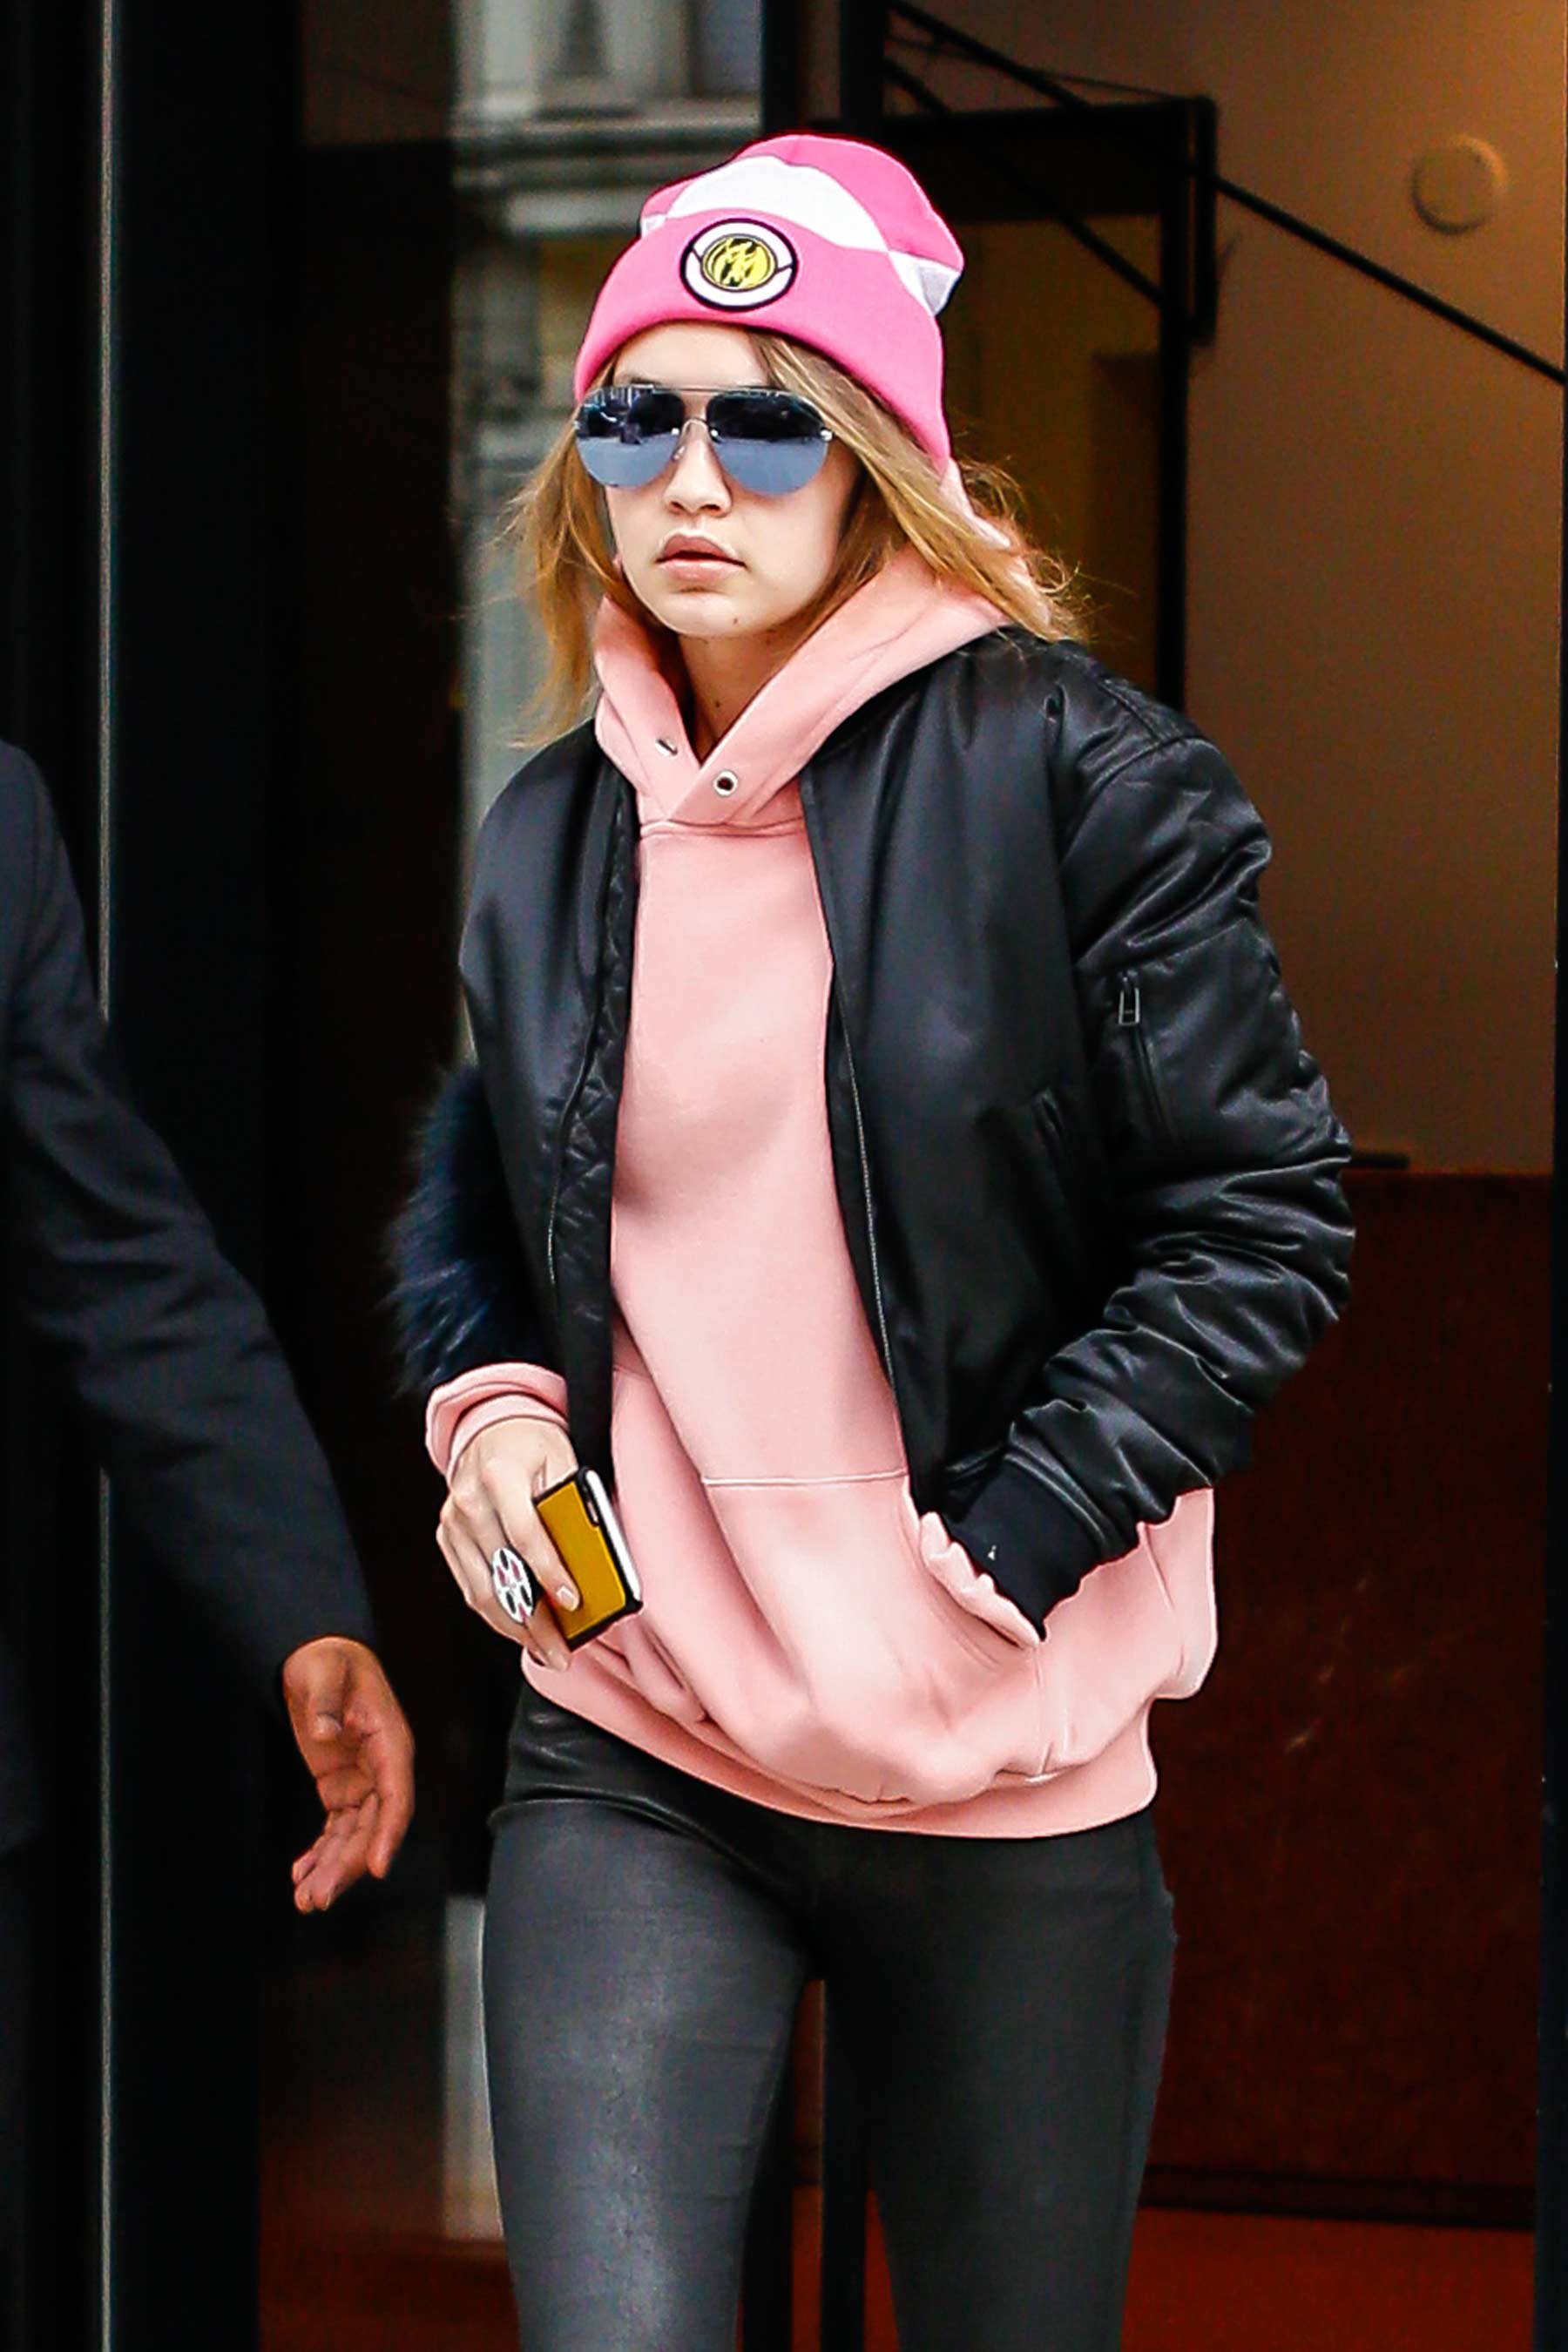 Gigi Hadid is spotted out and about in New York City